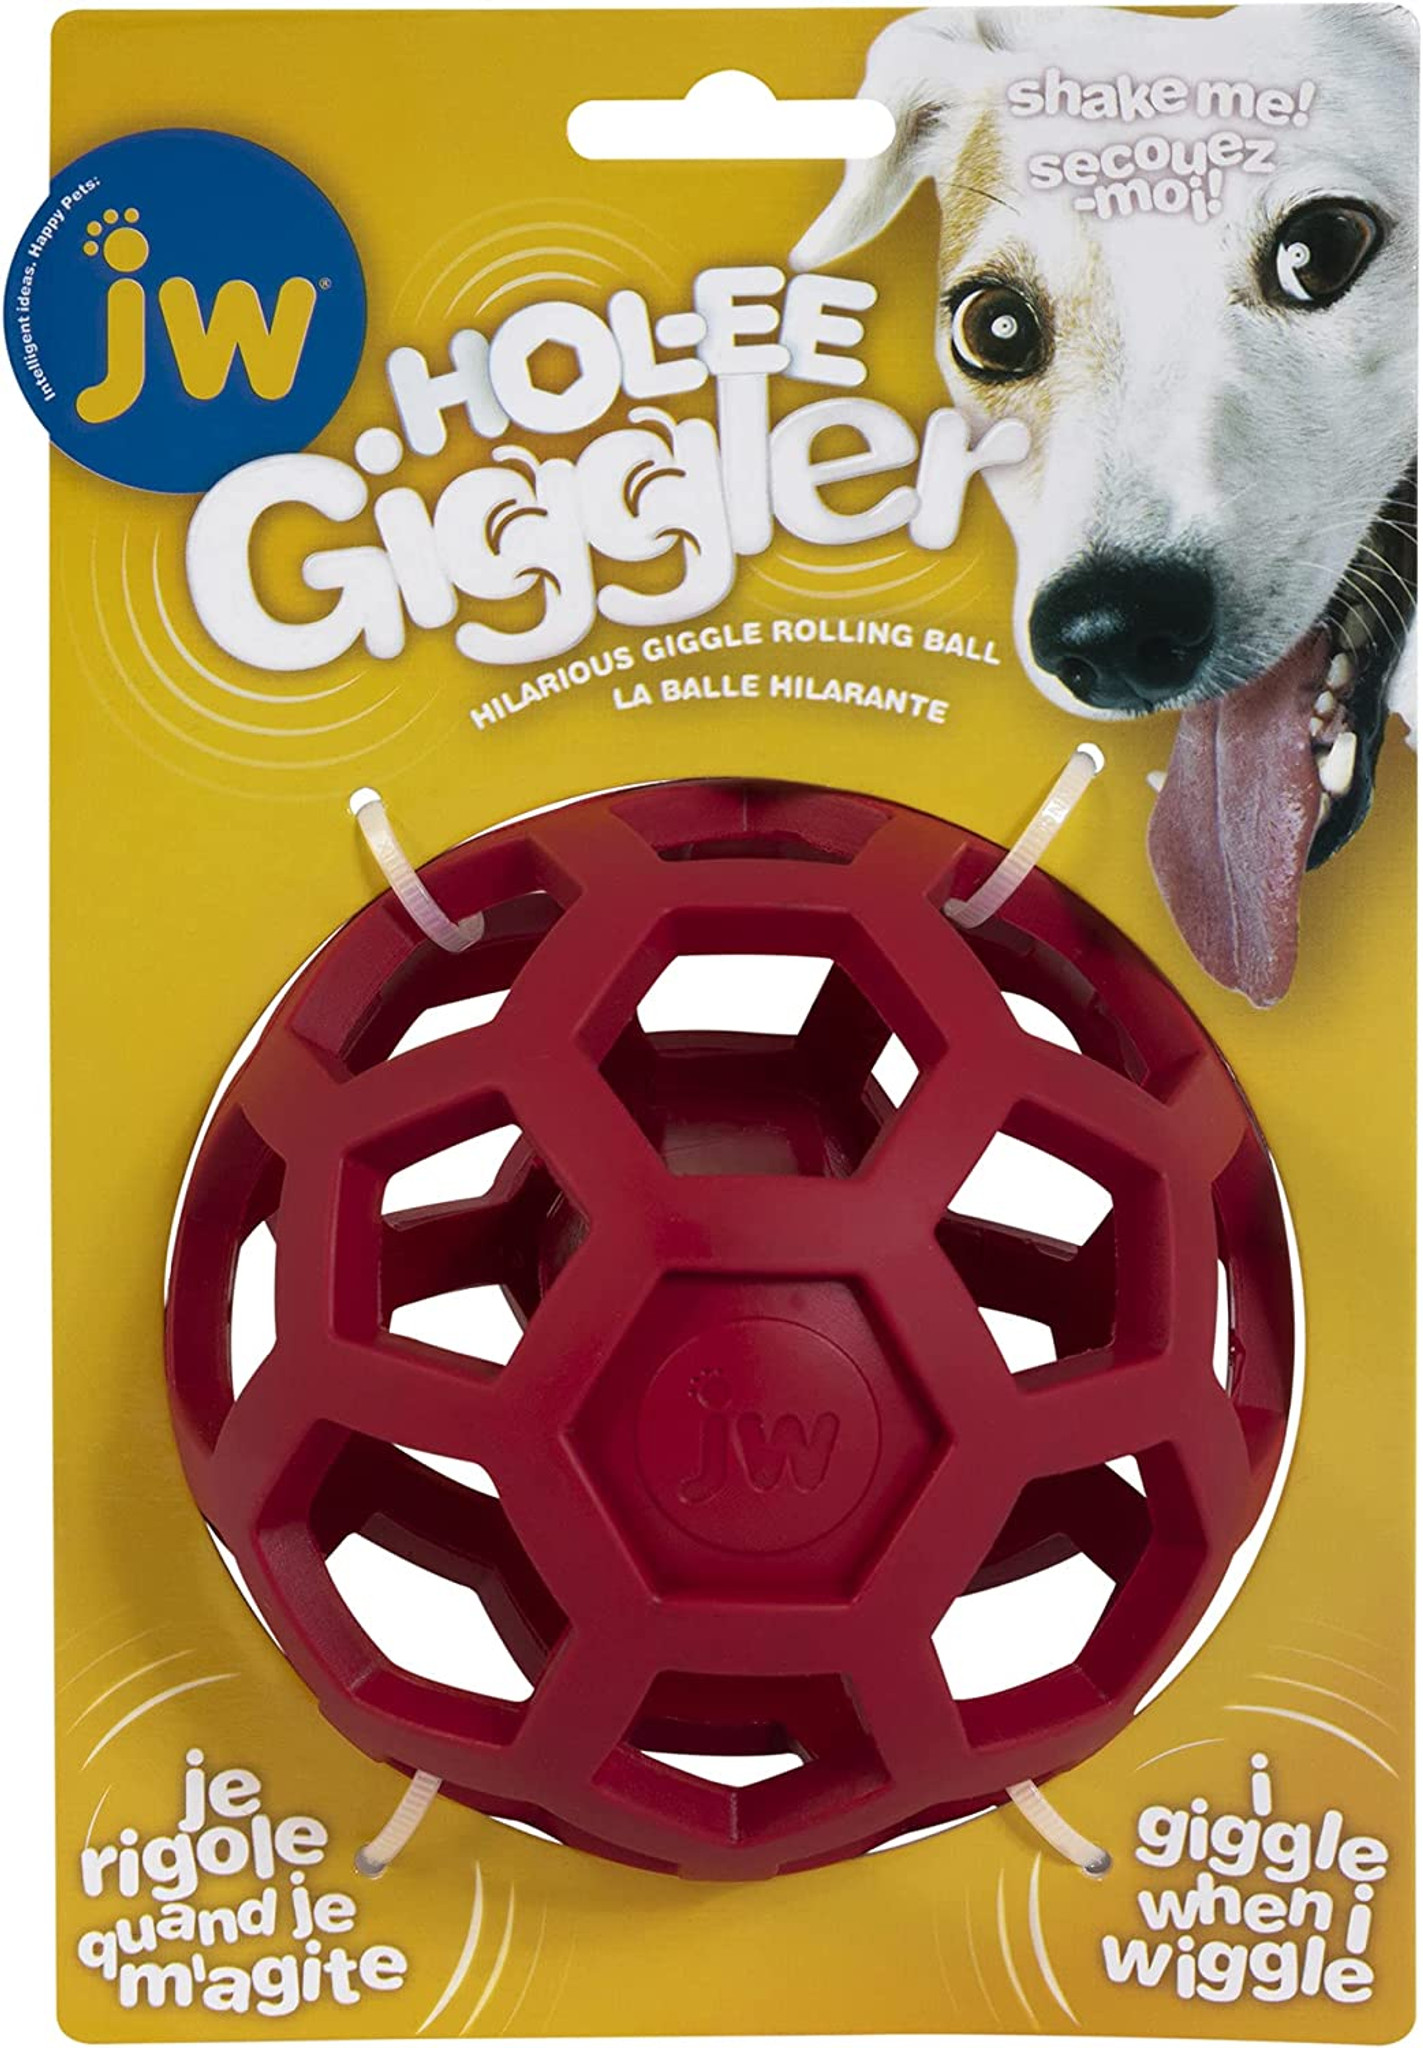 Keep your pet happy with this puzzle treat dispenser